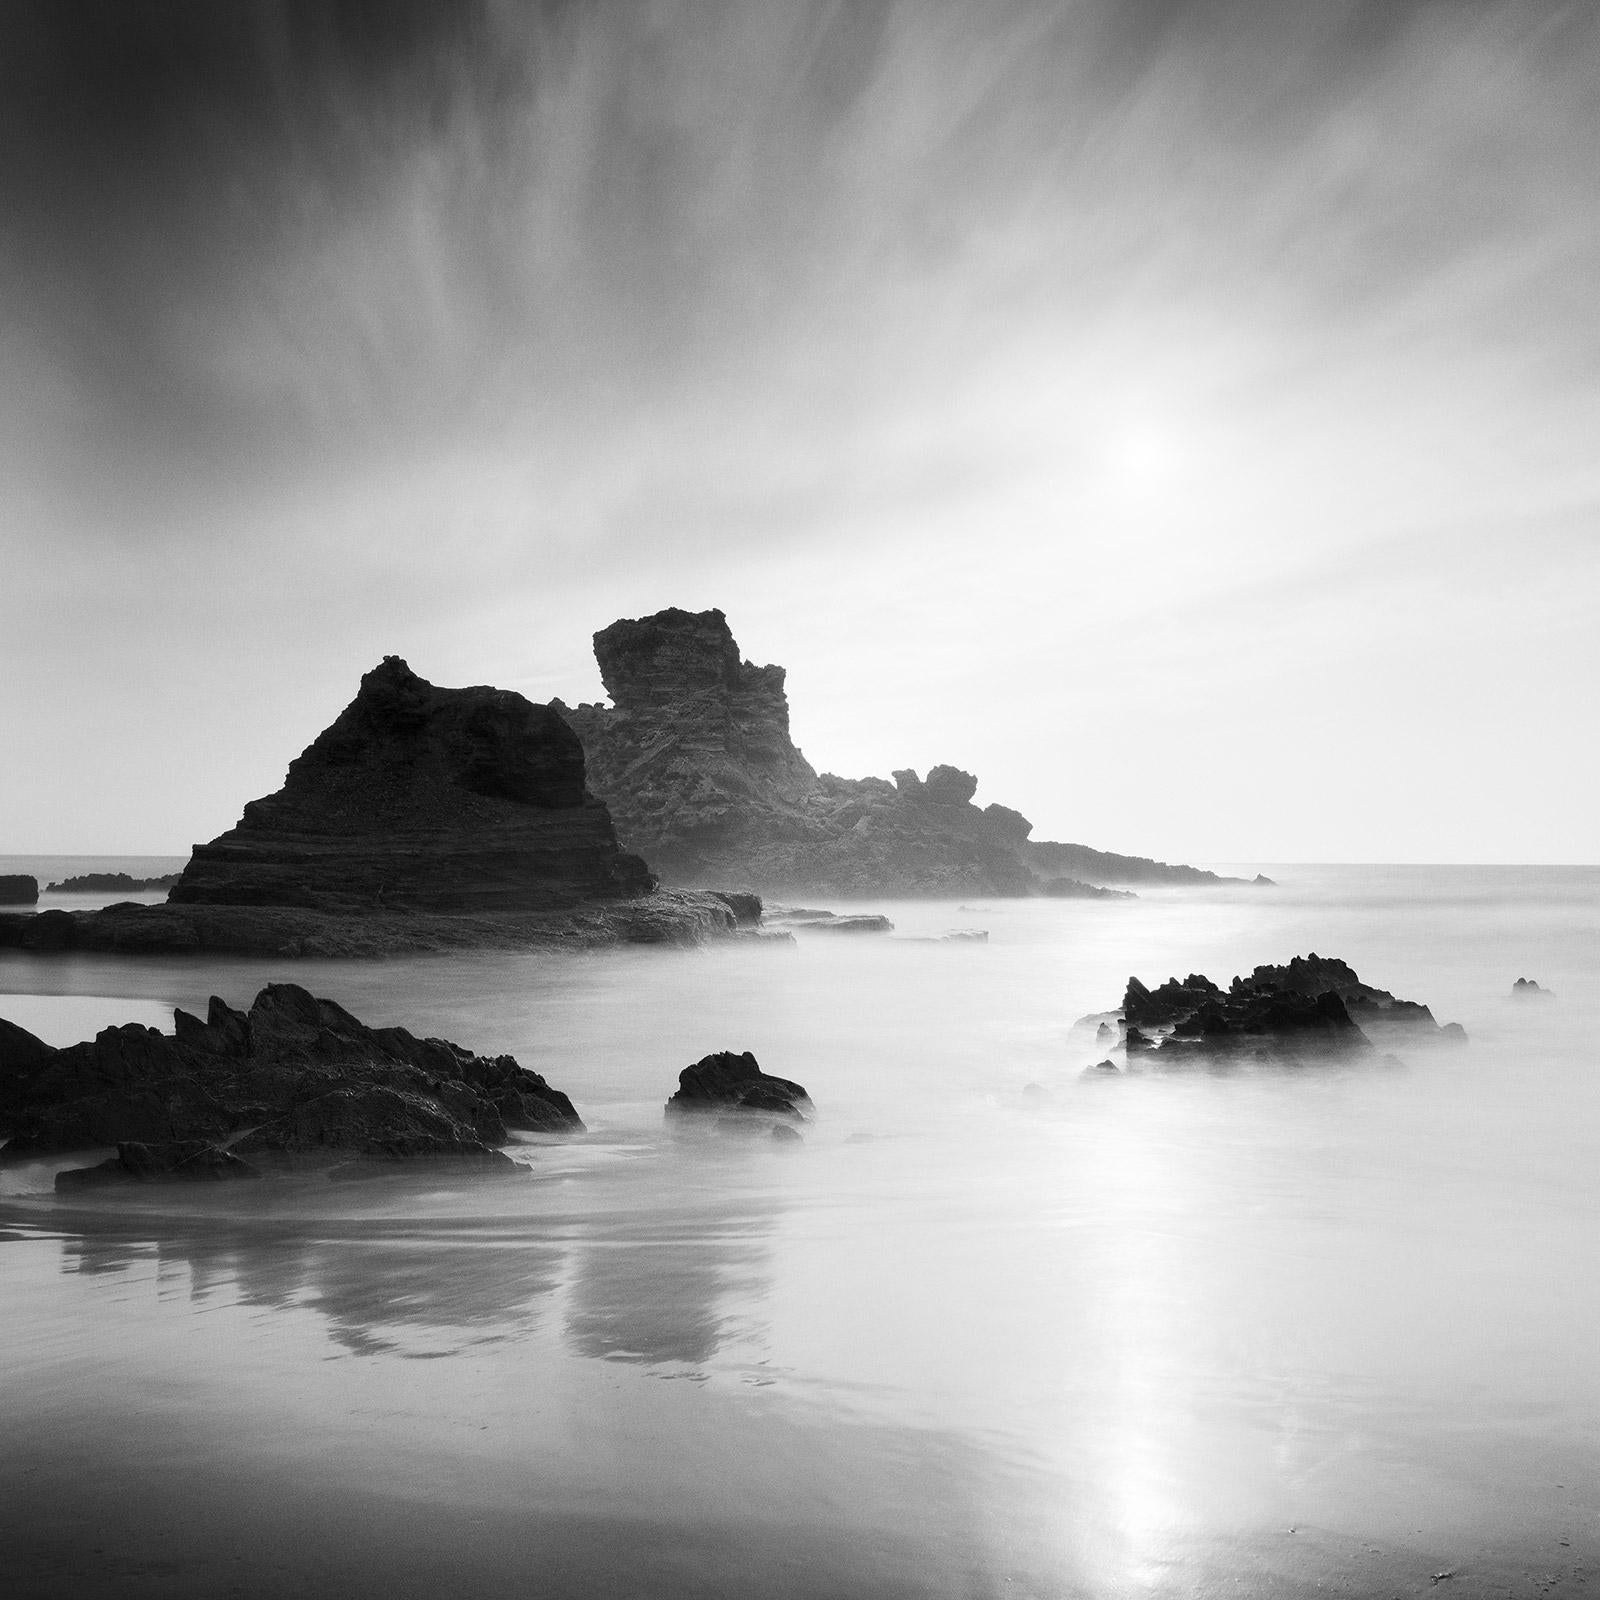 Stranded in Paradise, Beach, Spain, black and white, art landscape, photography